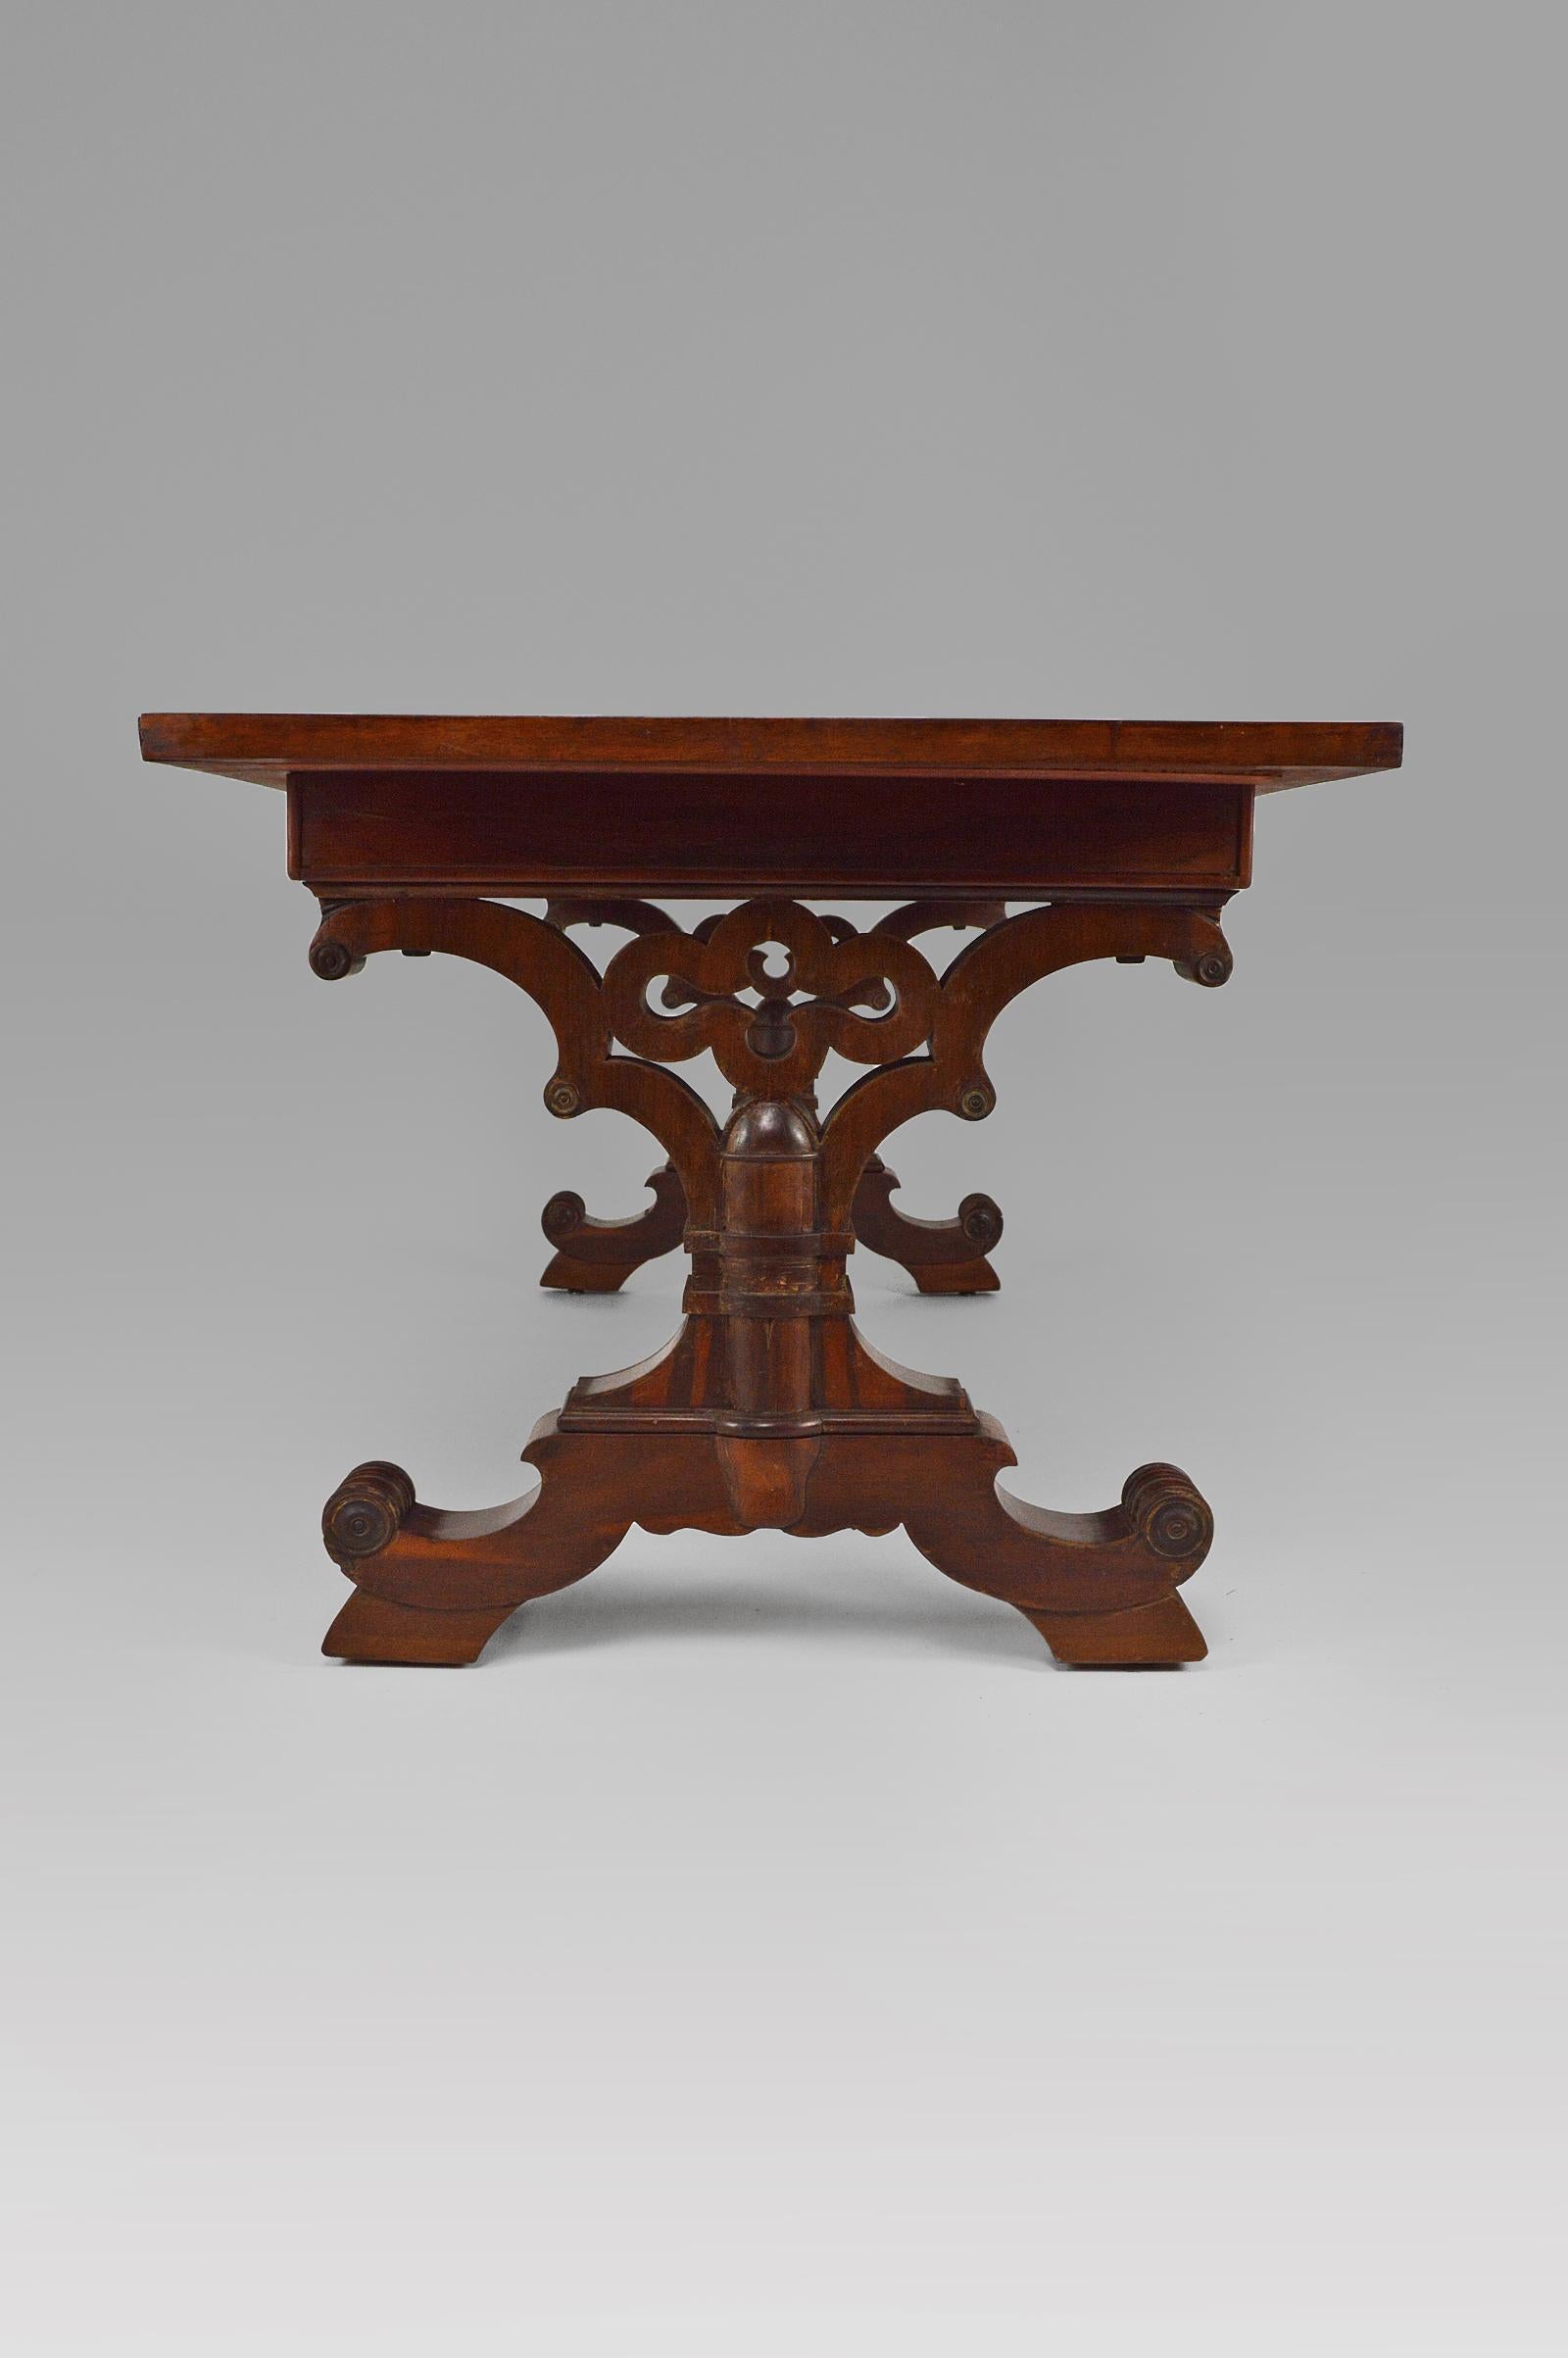 Gothic Revival Dining Table in Mahogany, Victorian Era, circa 1840 For Sale 3